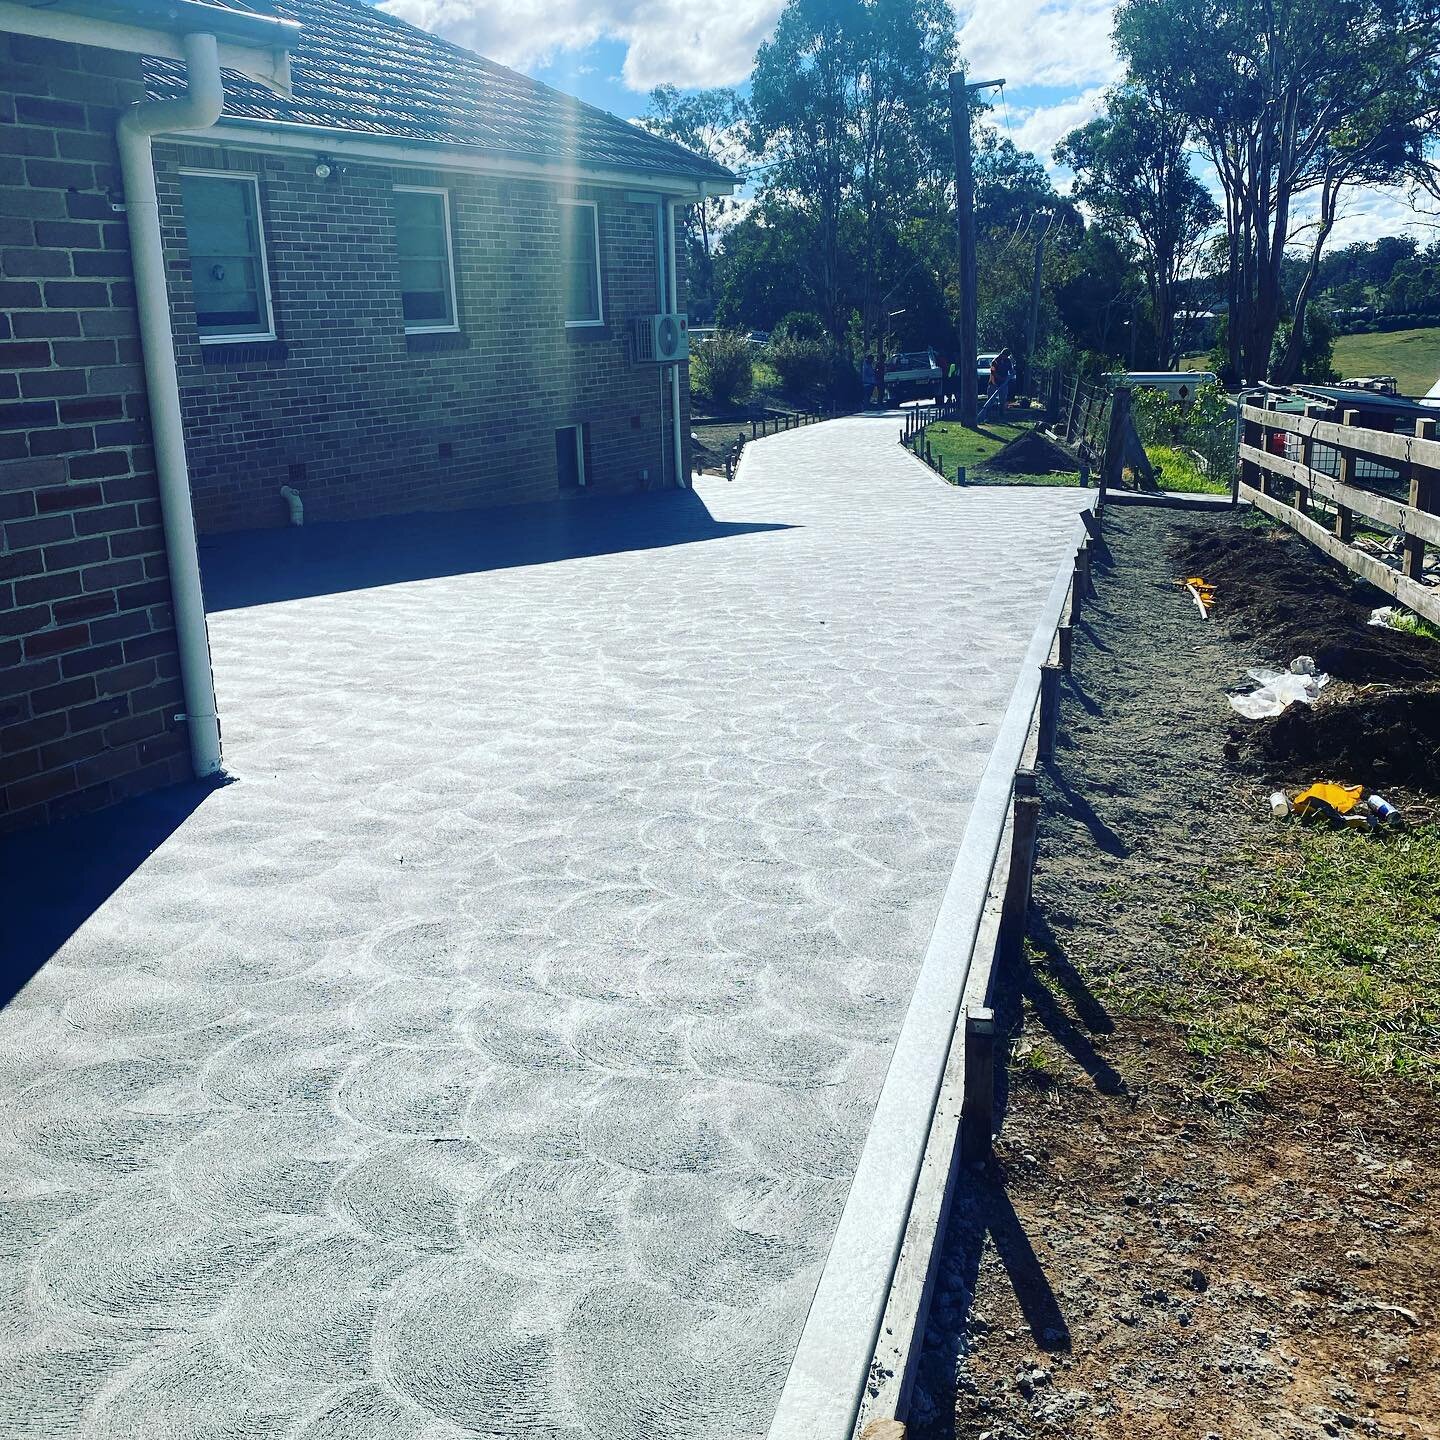 Picton Cottage finally wrapped up for RSL Lifercare, with the beautiful driveway, thanks to the Boylson Team